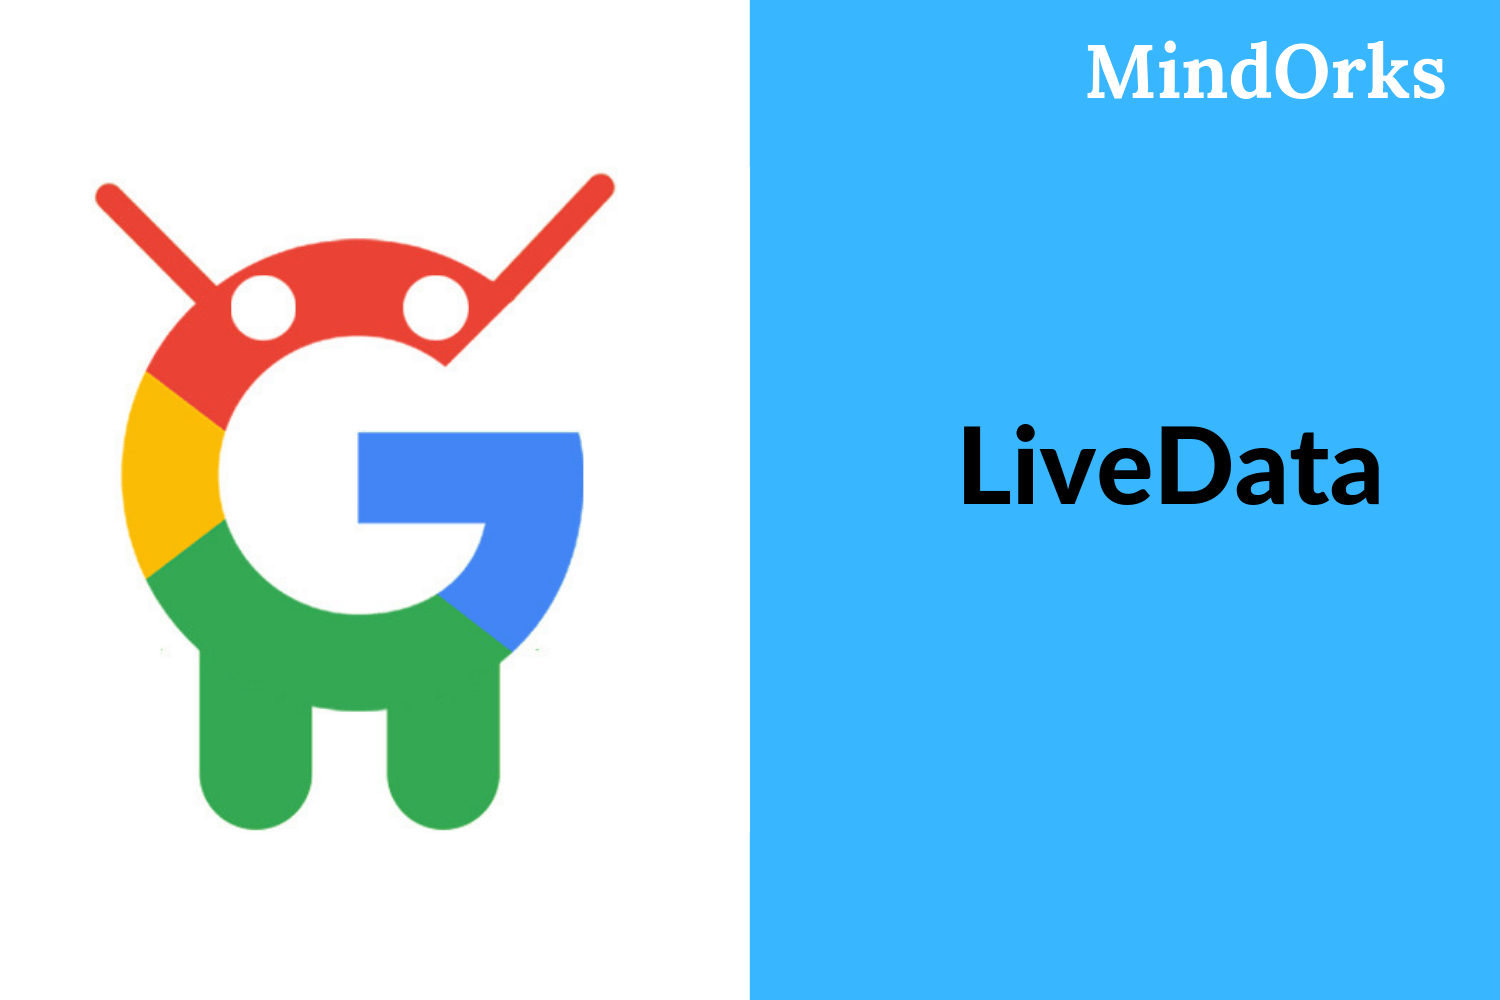 What is livedata?